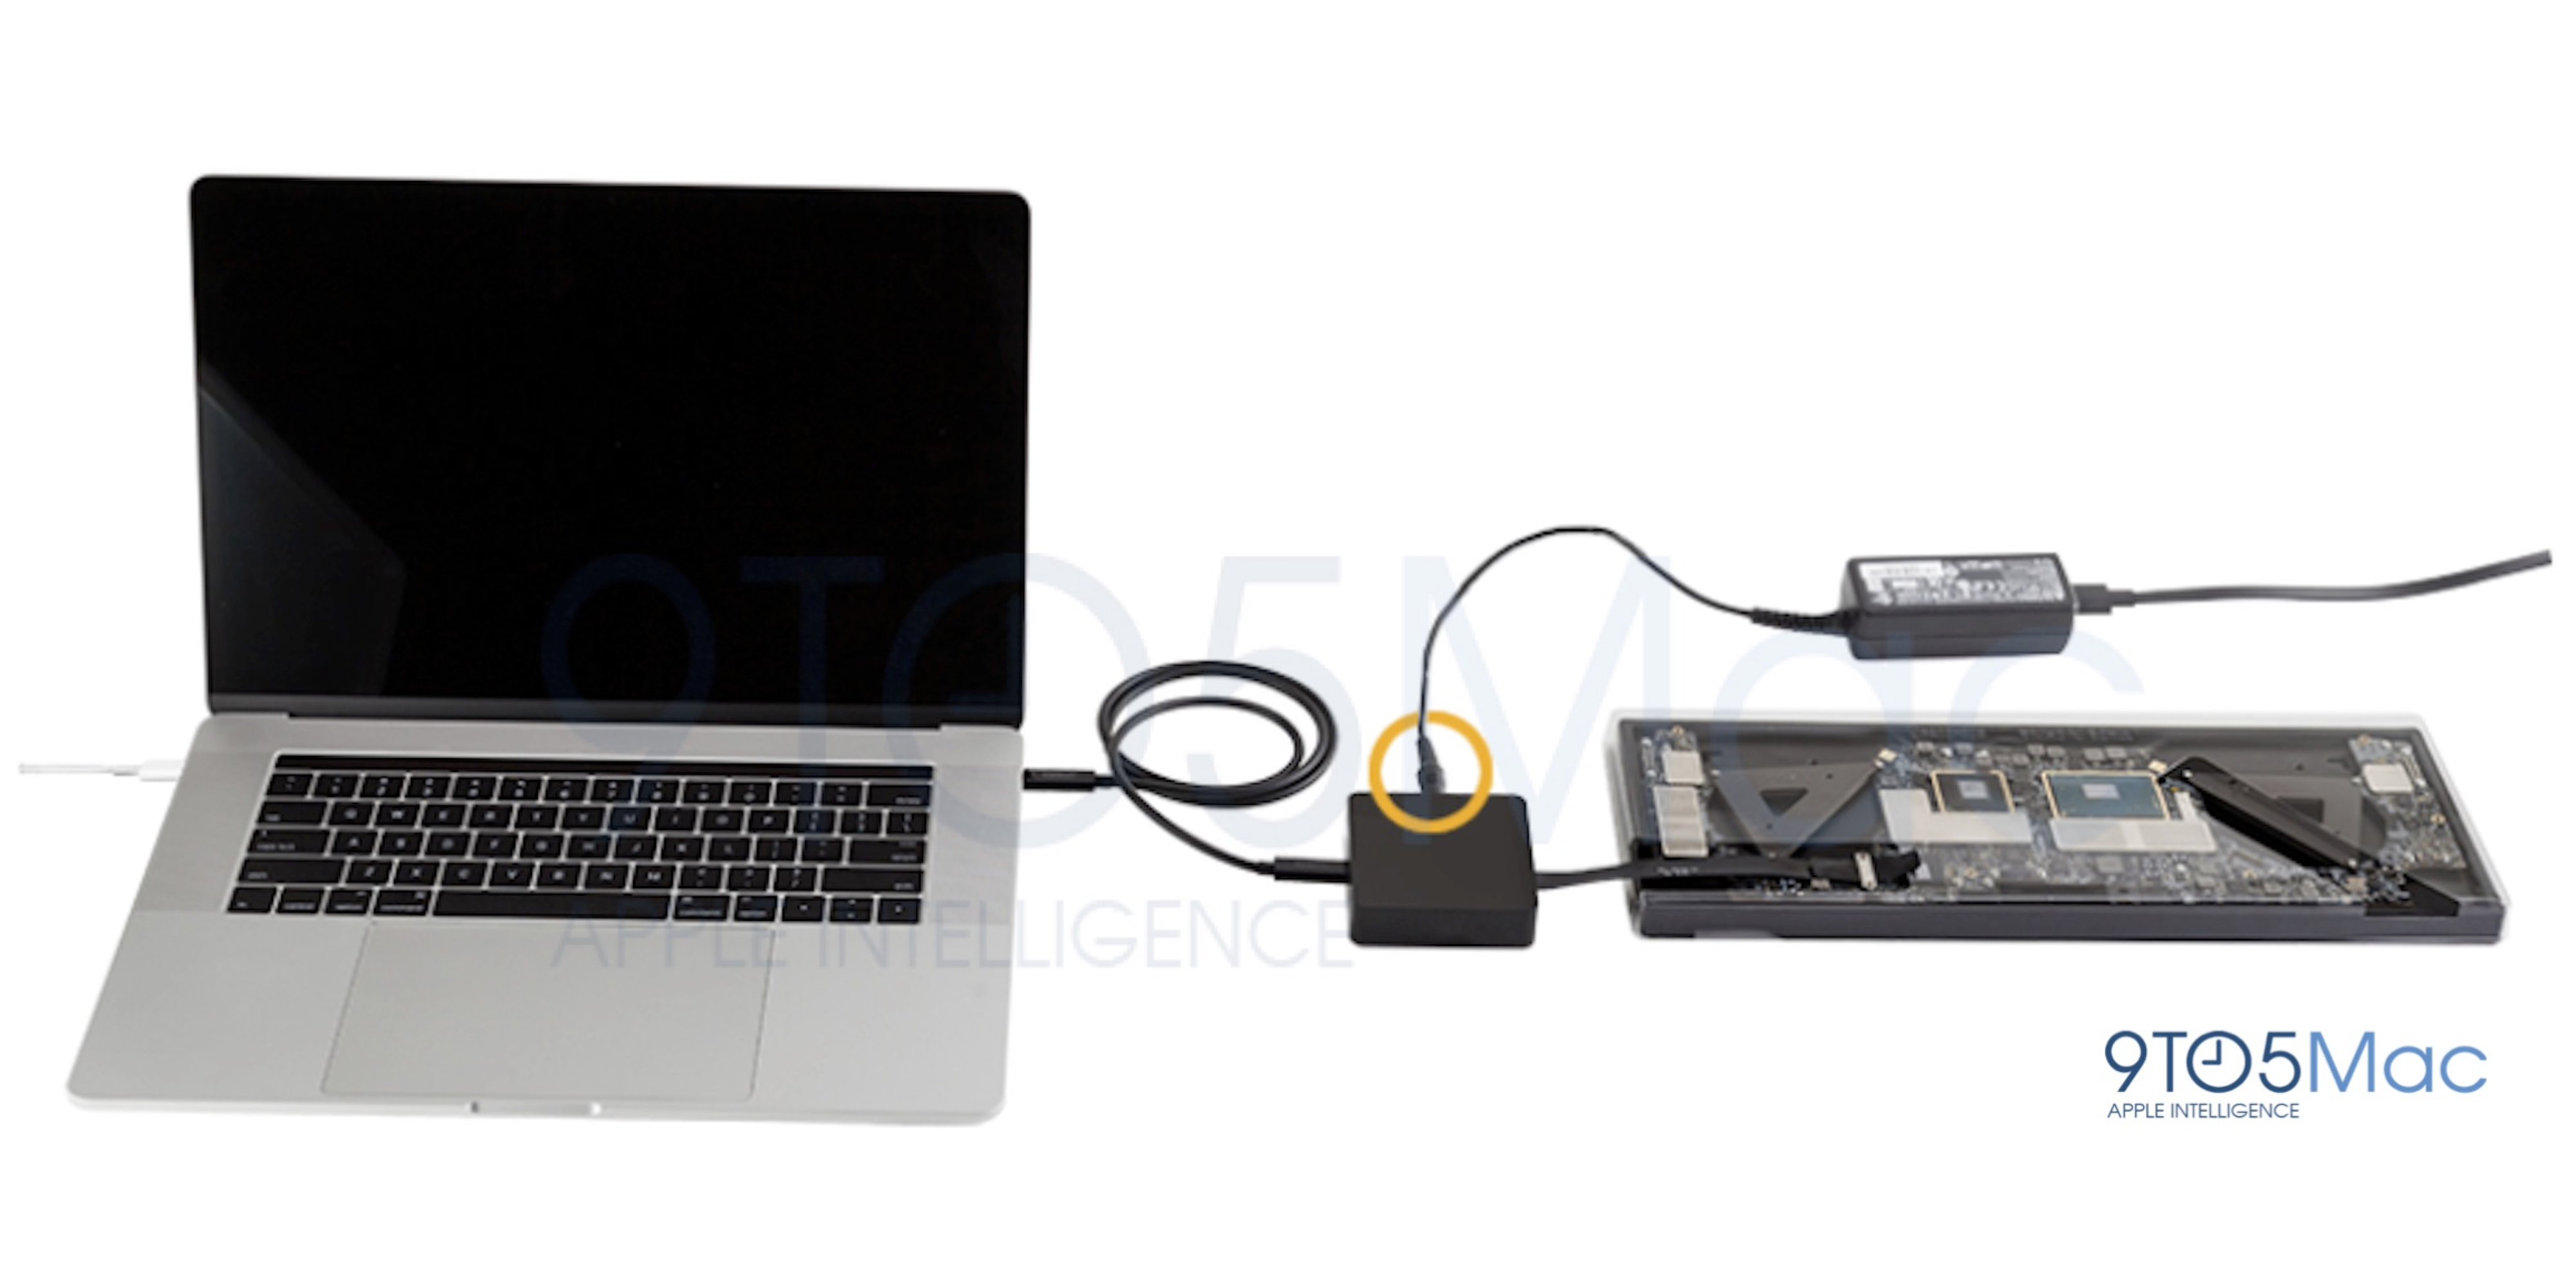 ungdomskriminalitet Drikke sig fuld kedelig This is Apple's special tool to help customers recover data from the  MacBook Pro's non-removable SSD - 9to5Mac